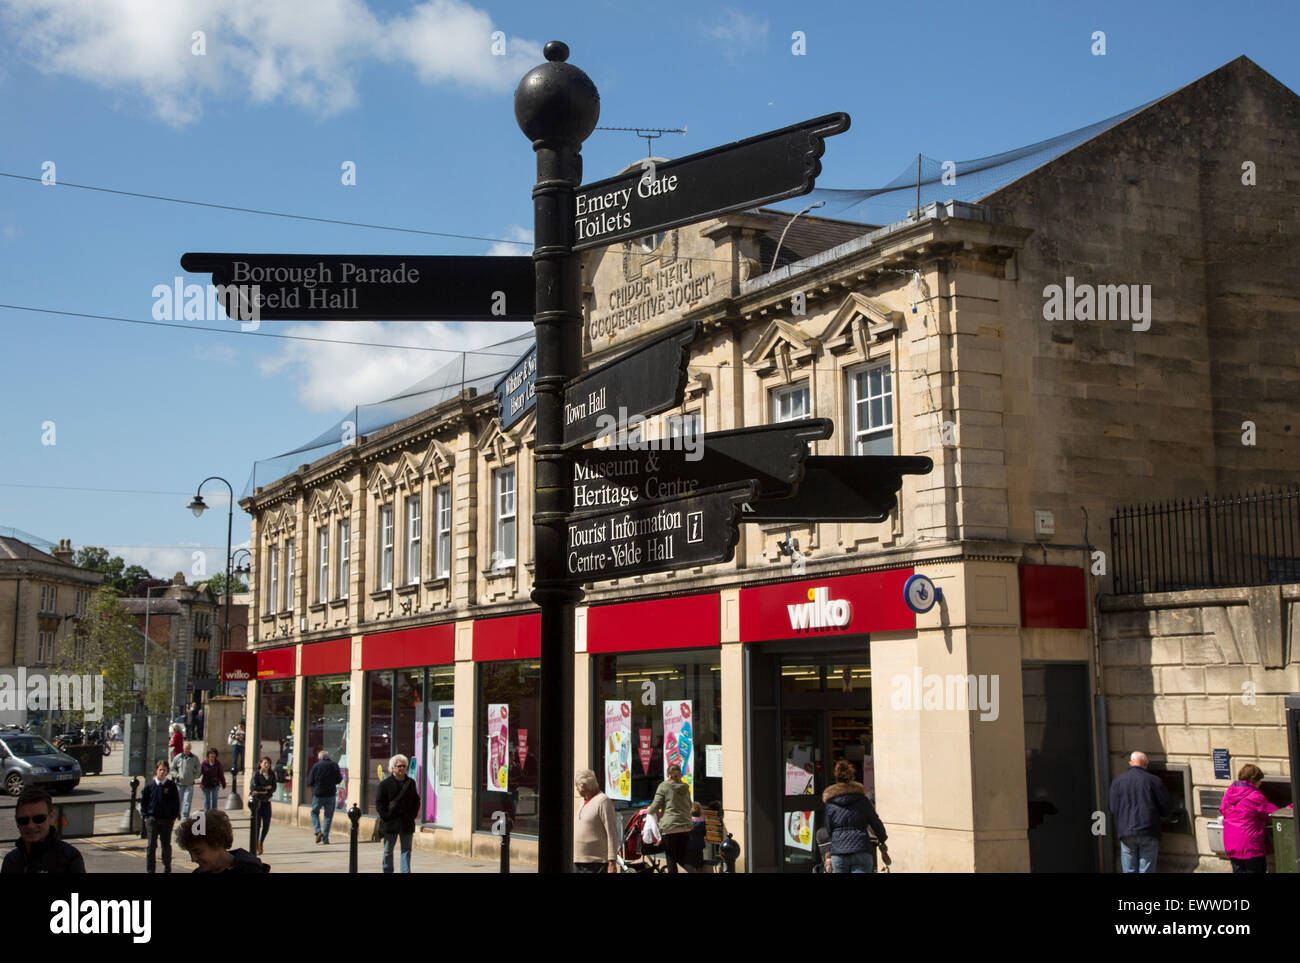 Main shopping High Street in town centre, Chippenham, Wiltshire, England, UK Stock Photo